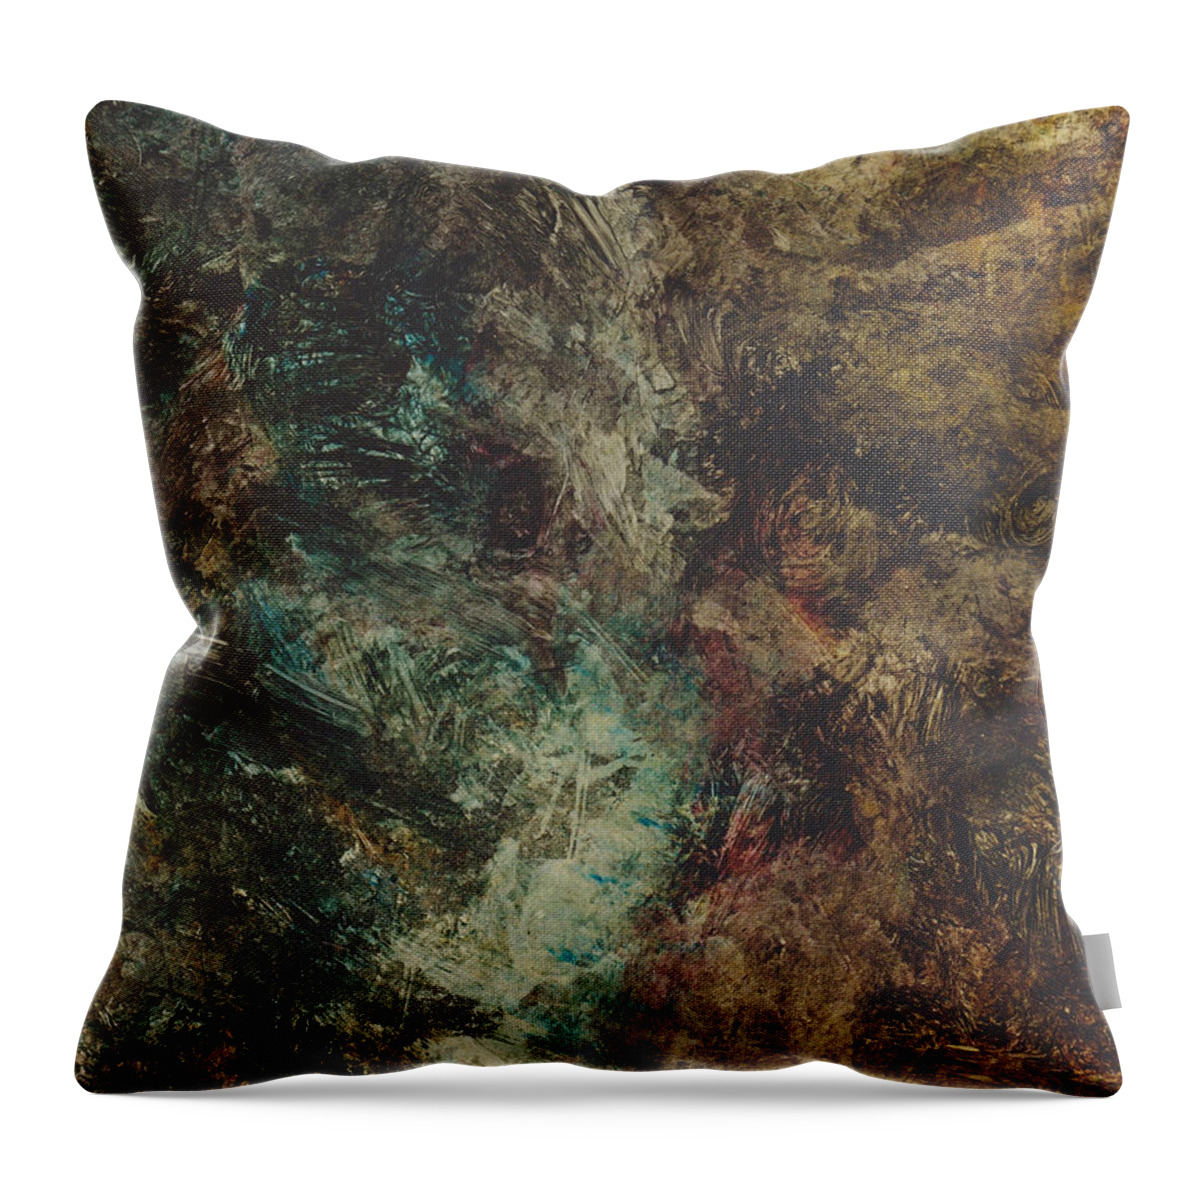 Waterfall Throw Pillow featuring the painting Waterfall 2 by David Ladmore